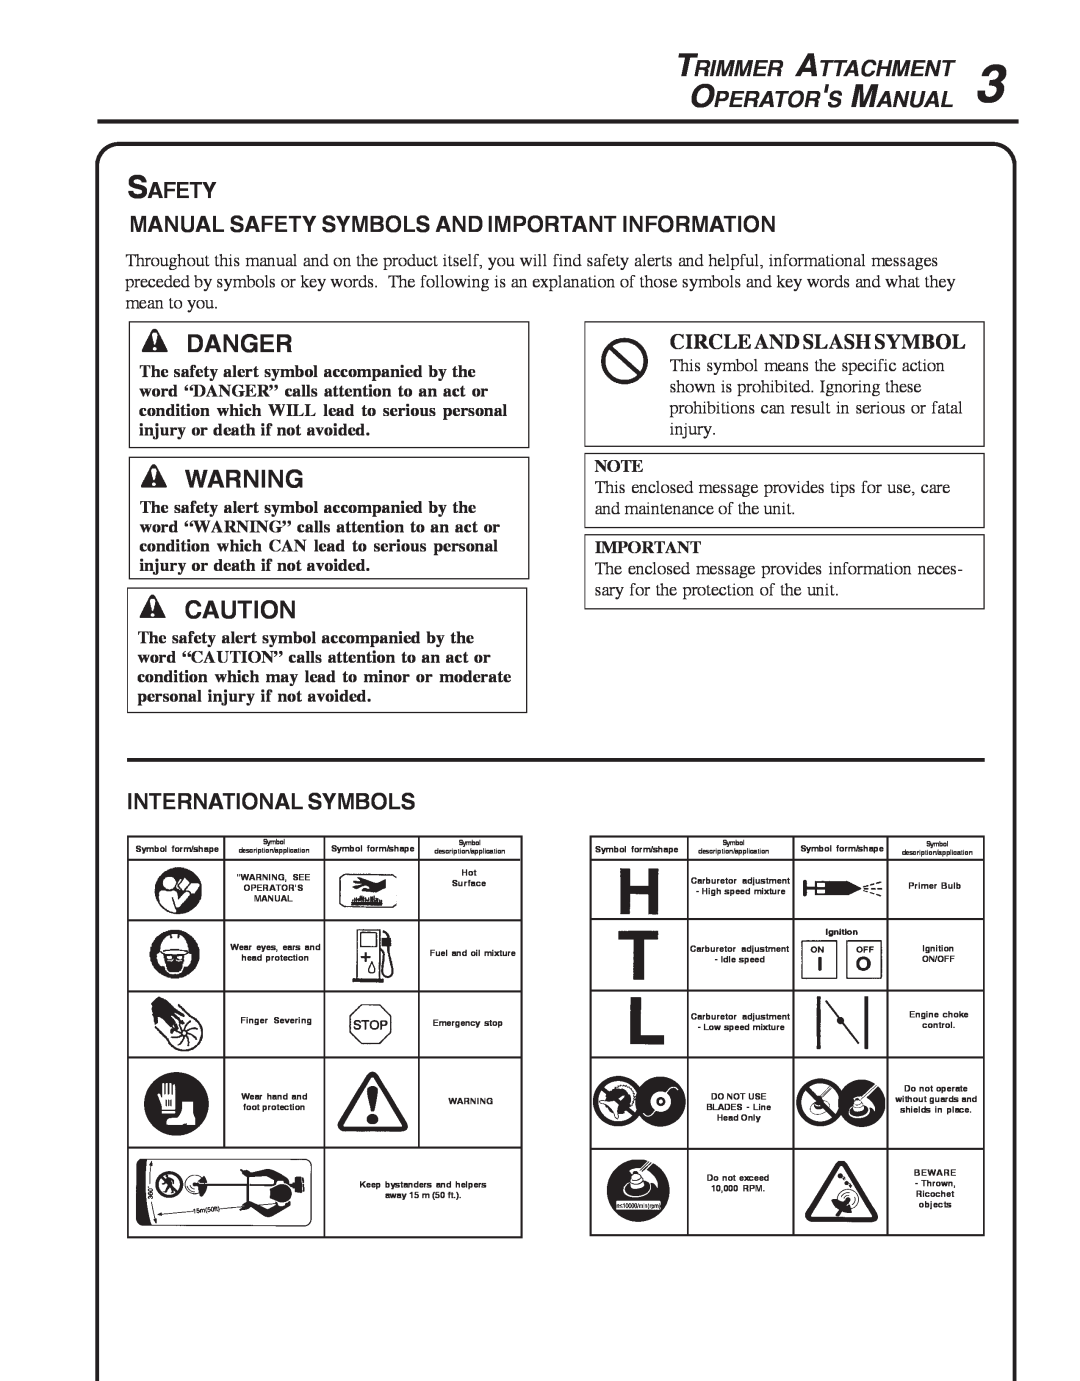 Echo SRM-2400SB manual Danger, Trimmer Attachment Operators Manual, Safety Manual Safety Symbols And Important Information 